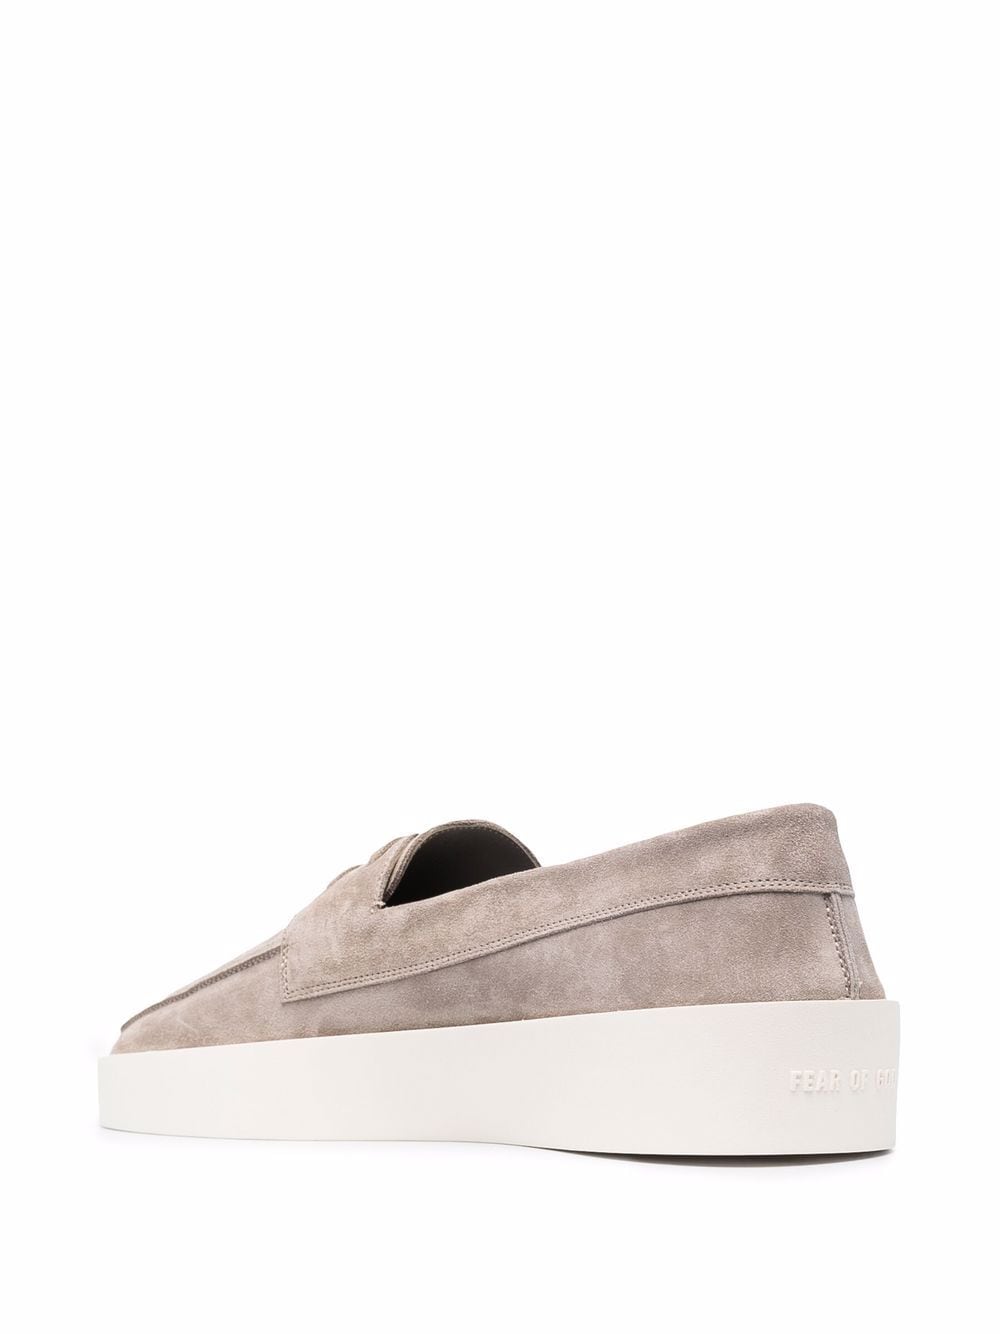 FEAR OF GOD Laced Suede Loafers Brown - MAISONDEFASHION.COM